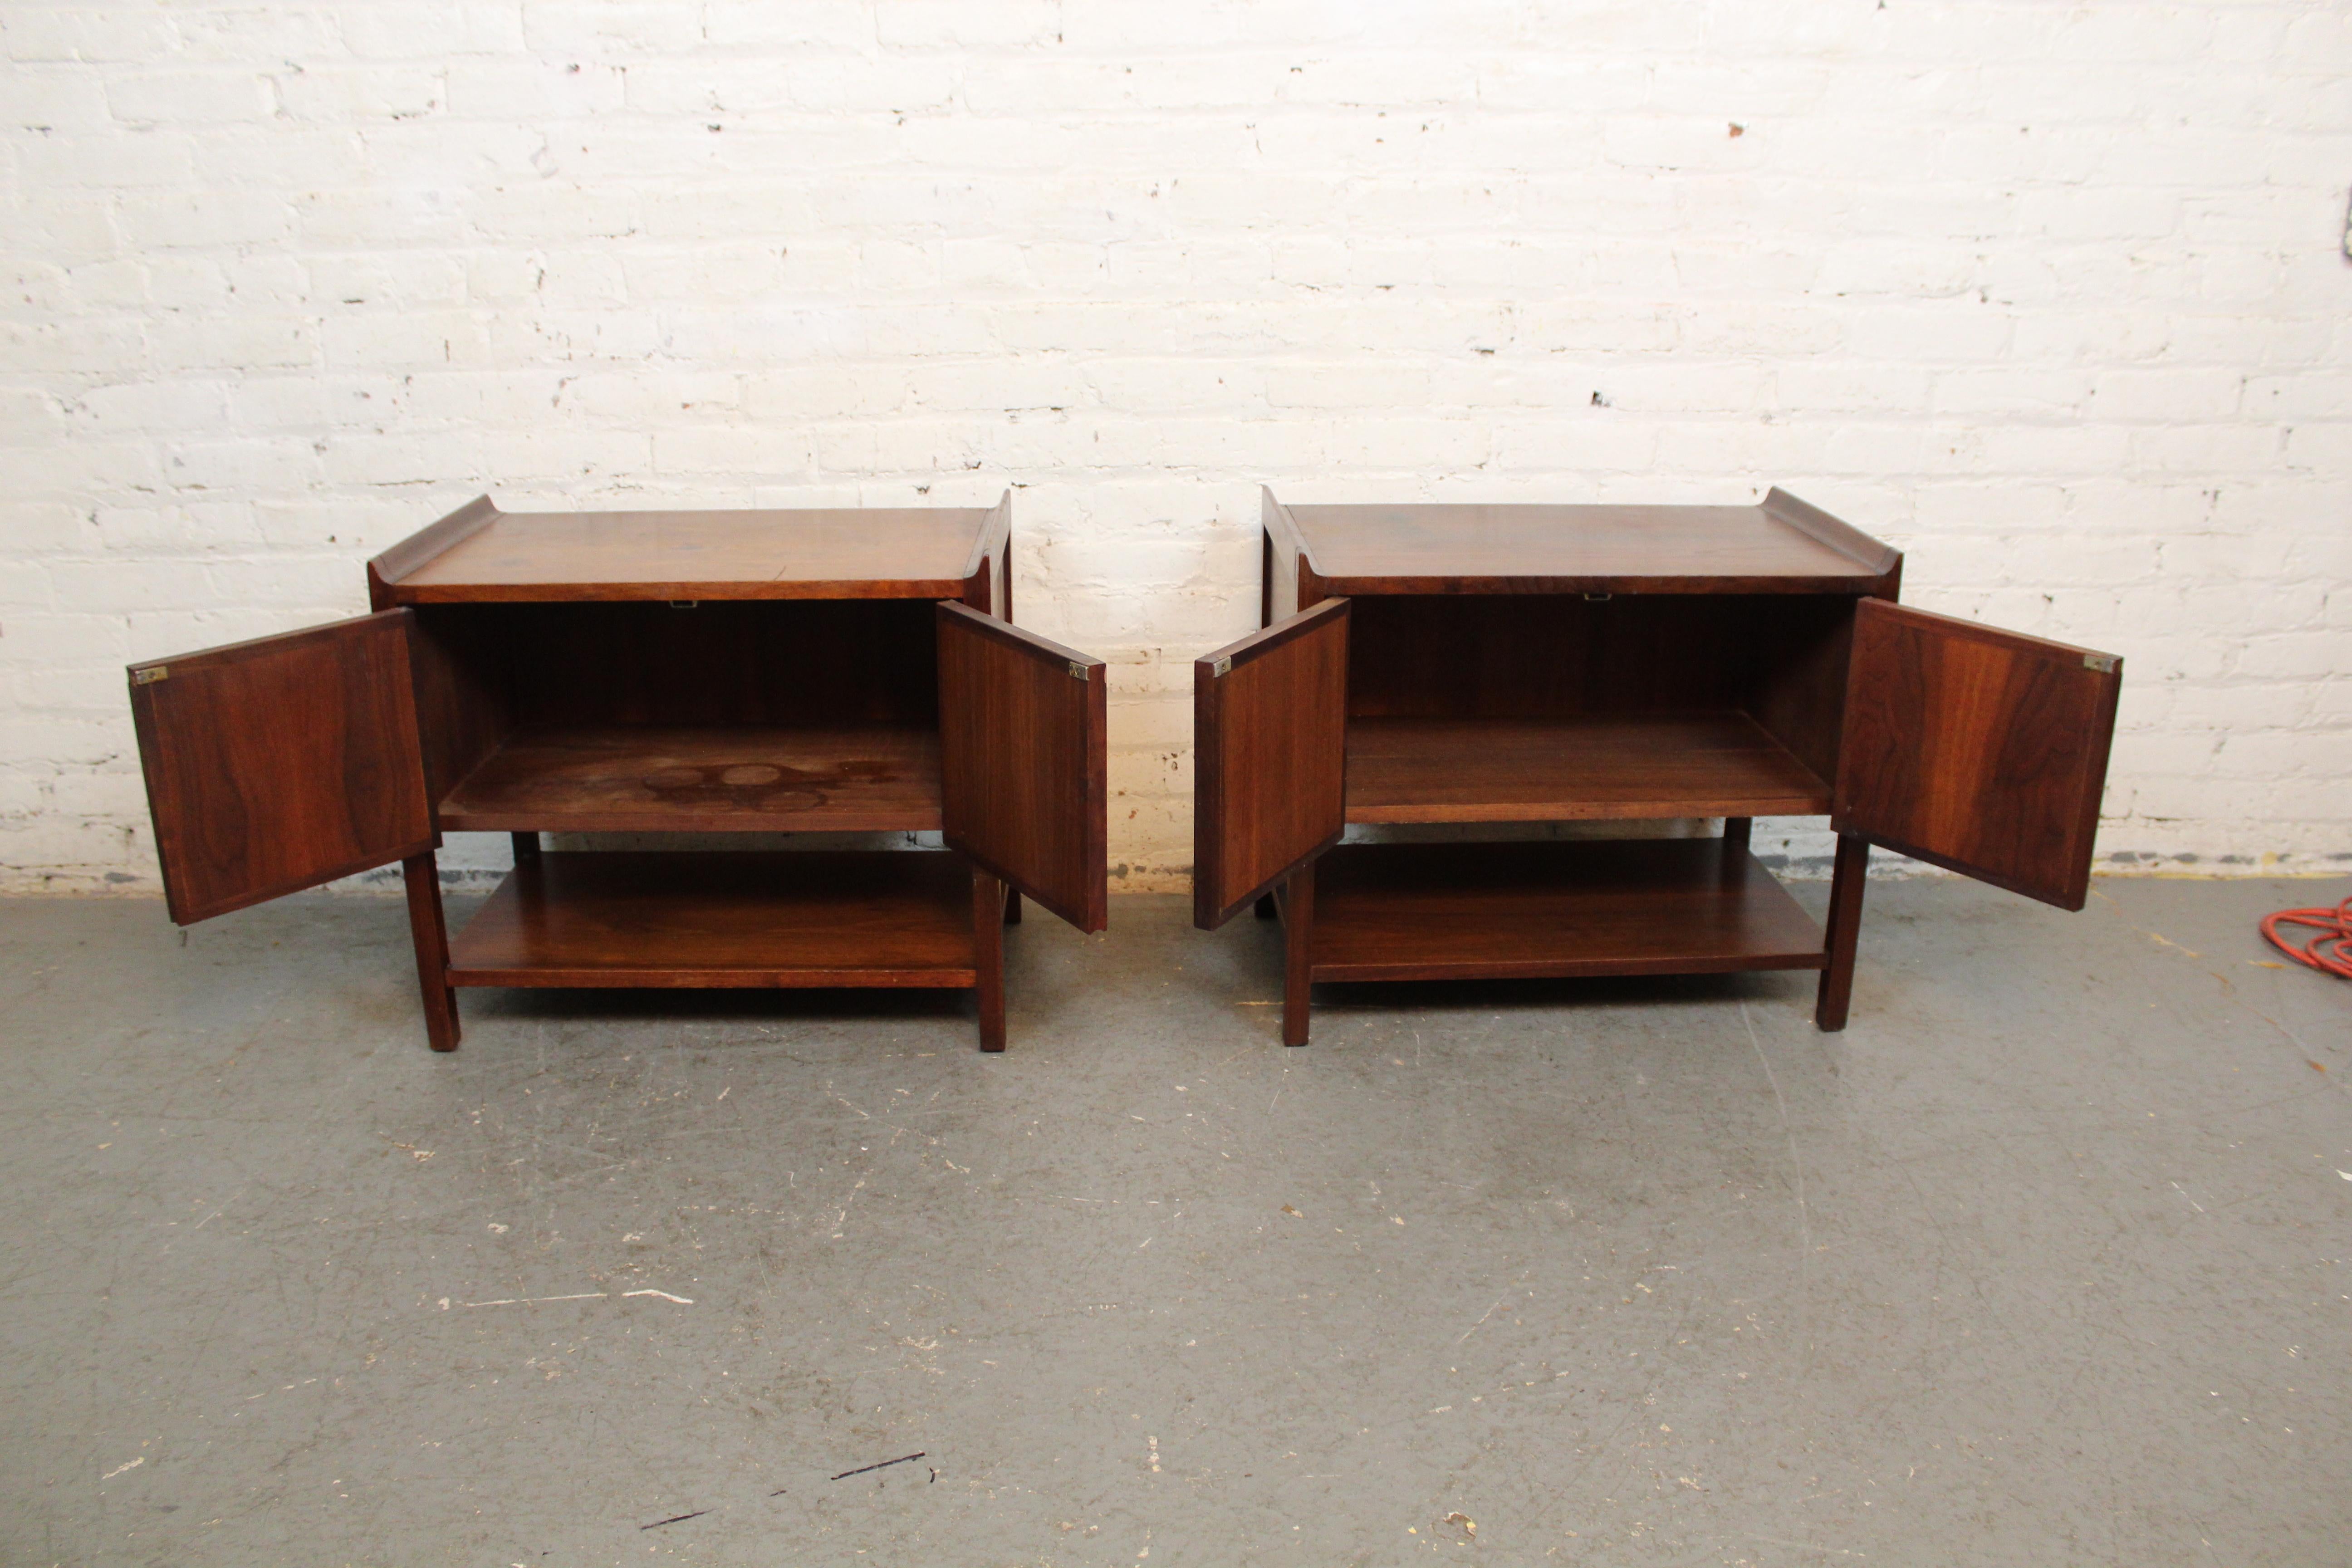 20th Century Vintage American Walnut + Leather Nightstands by Dillingham For Sale